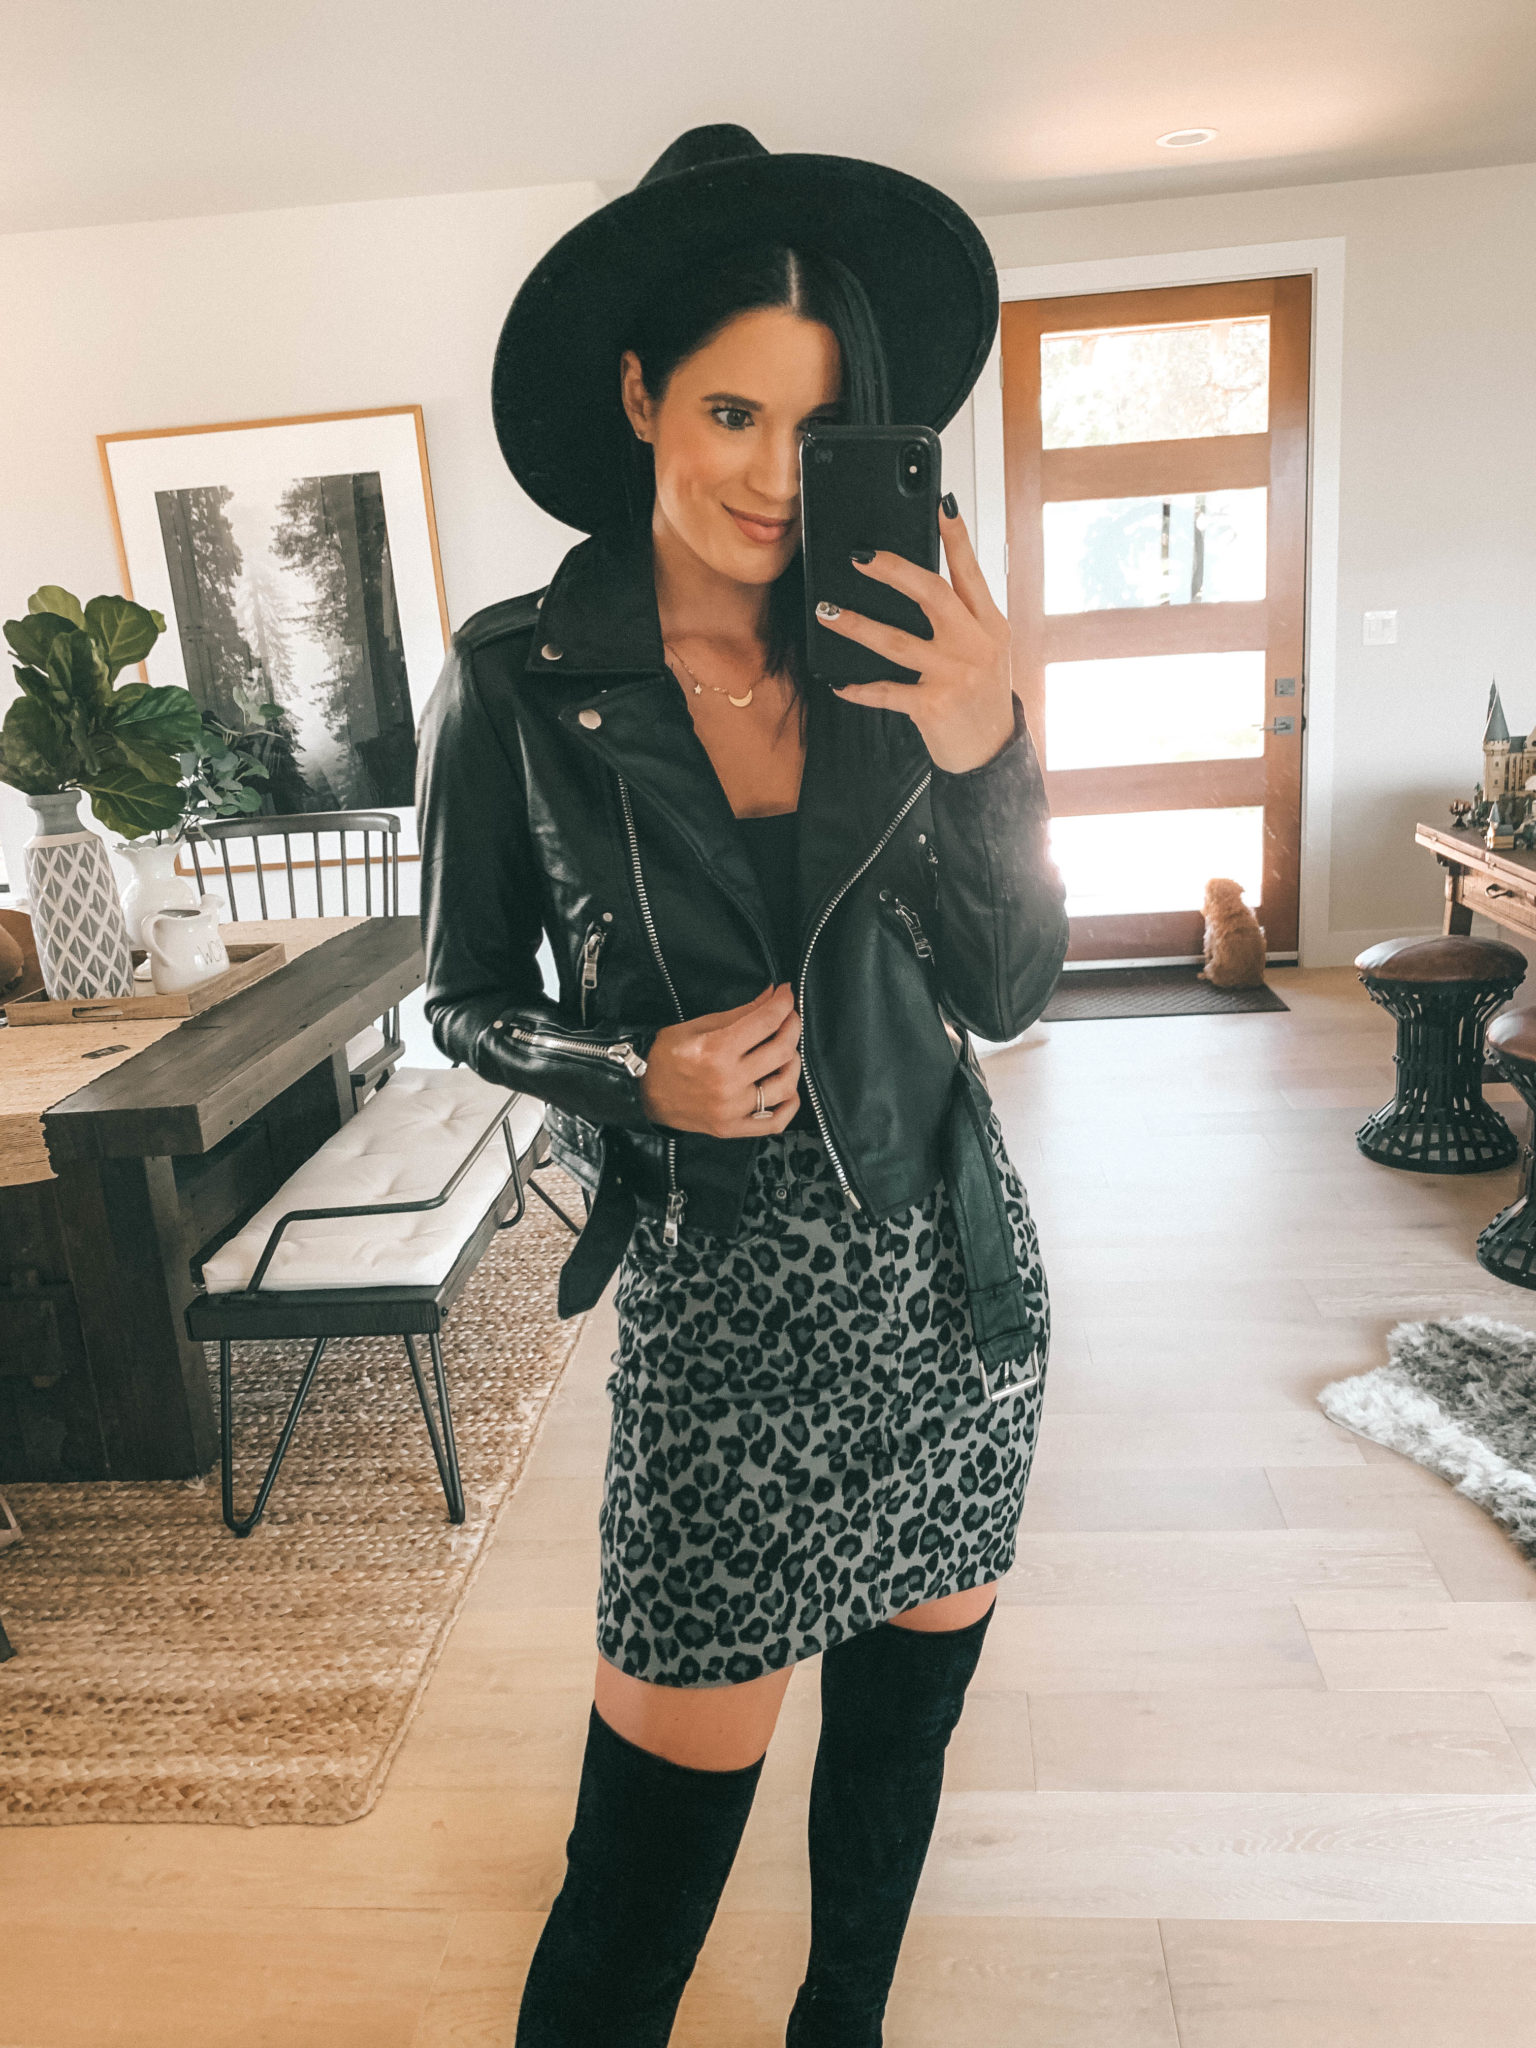 7 Affordable Fall Outfits from Walmart by popular Austin fashion blog, Dressed to Kill: image of a woman standing inside her house and wearing a black Walmart Sofia Jeans Cold-Shoulder Ruffle Neck Woven Top, Sofia Jeans Margarita Leopard Print Pencil Skirt, and Celsius Women's Faux Leather Moto Jacket.